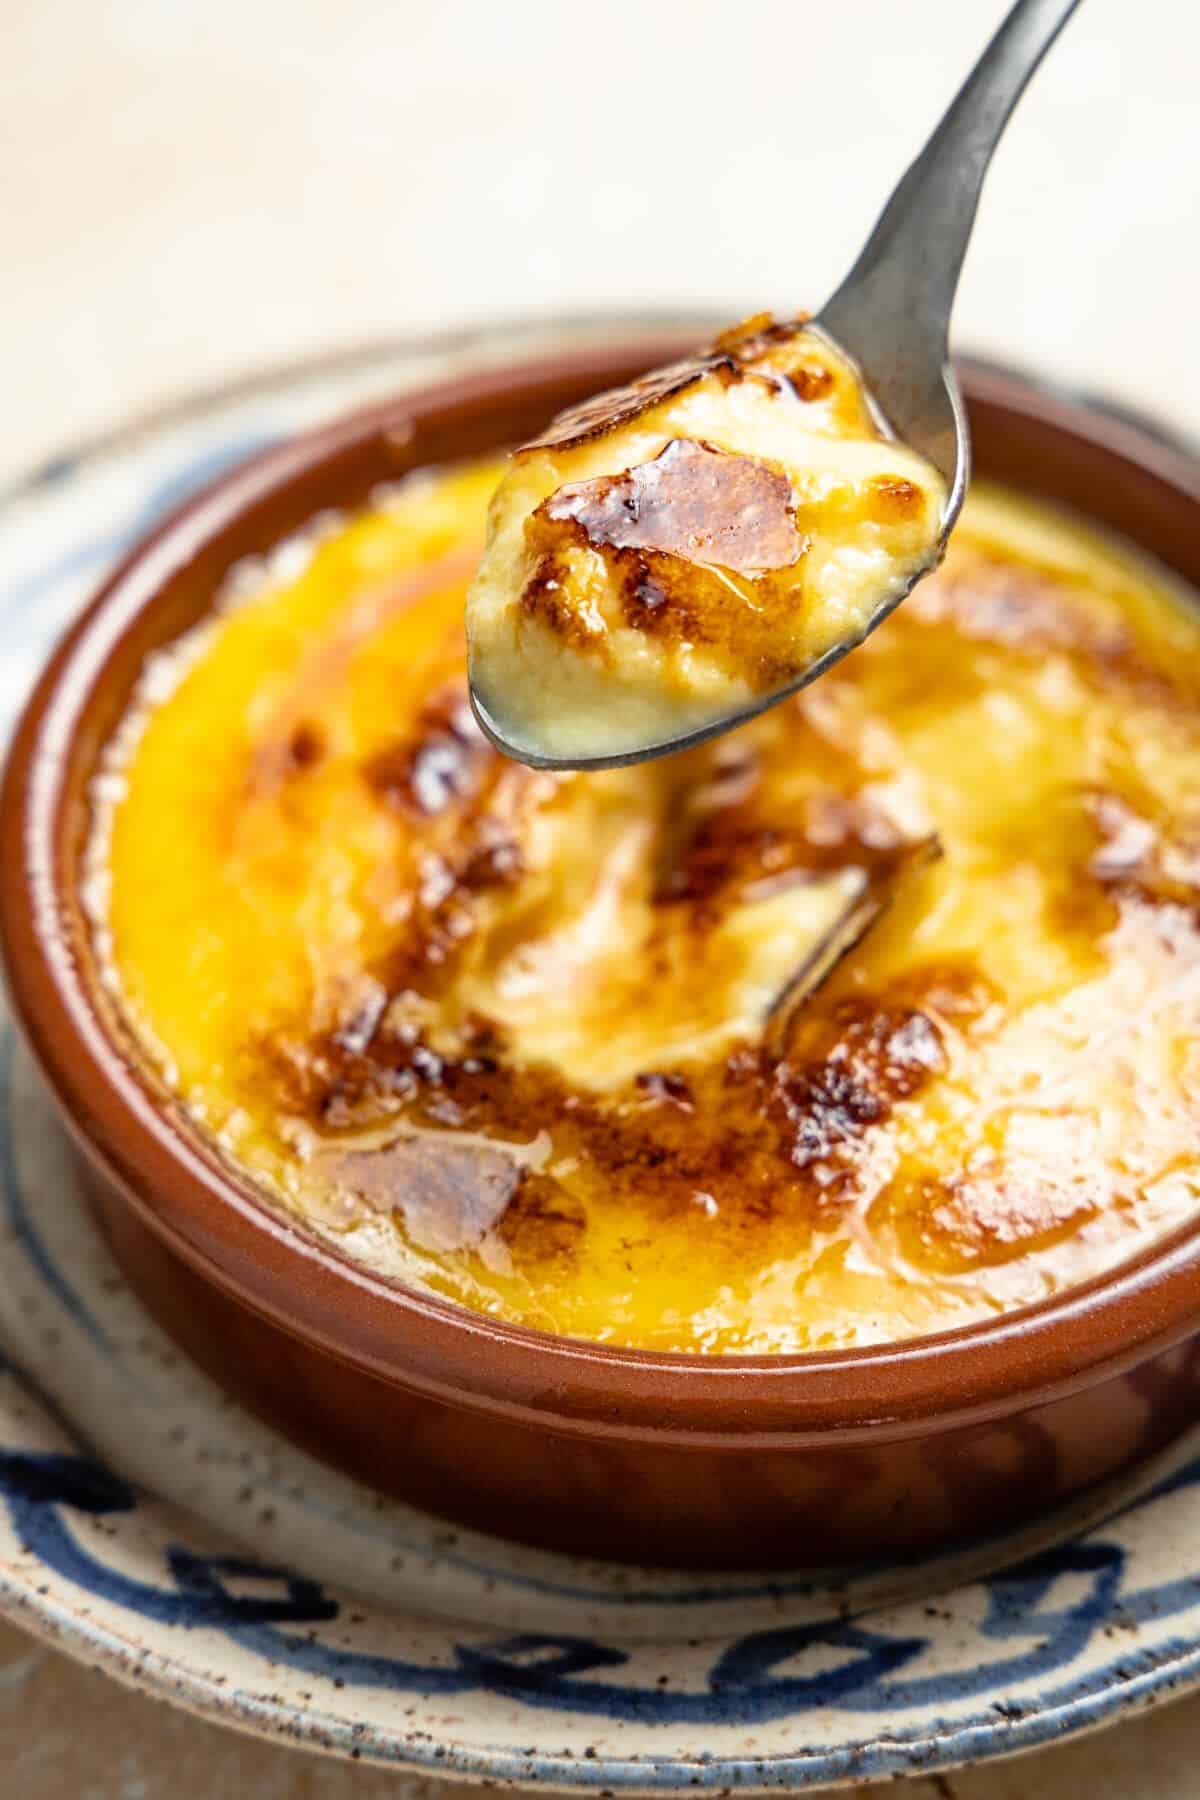 Bite of Crema Catalana with a brown caramelized crust.